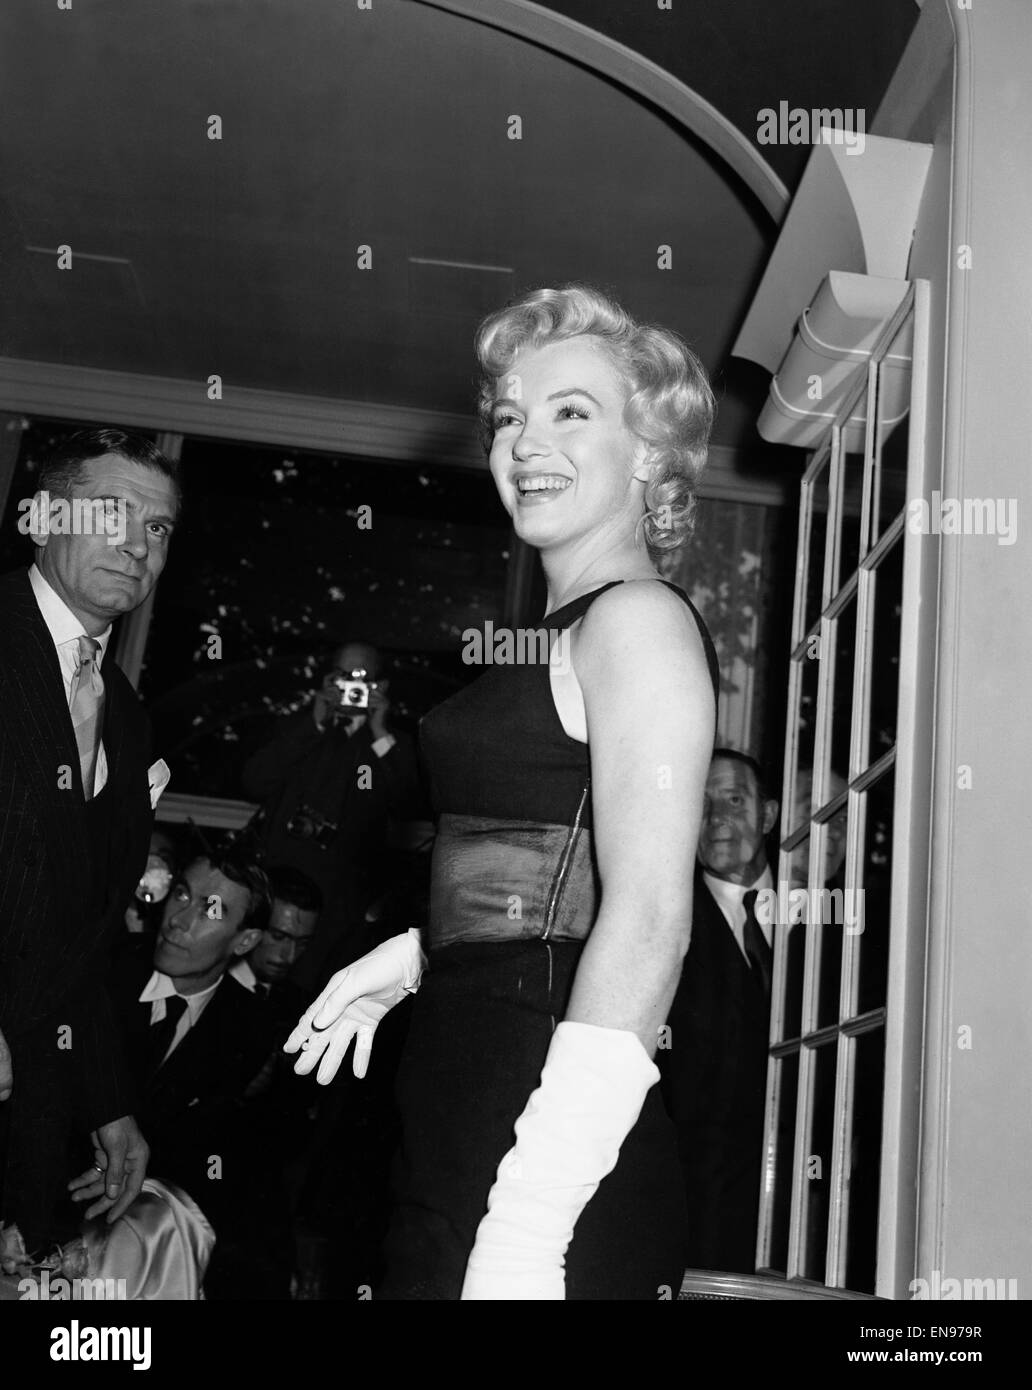 American film actress Marilyn Monroe at the Savoy Hotel during her visit to London to promote her latest film 'The Prince and The showgirl' also starring Laurence Olivier (left). 15th July 1956. Stock Photo